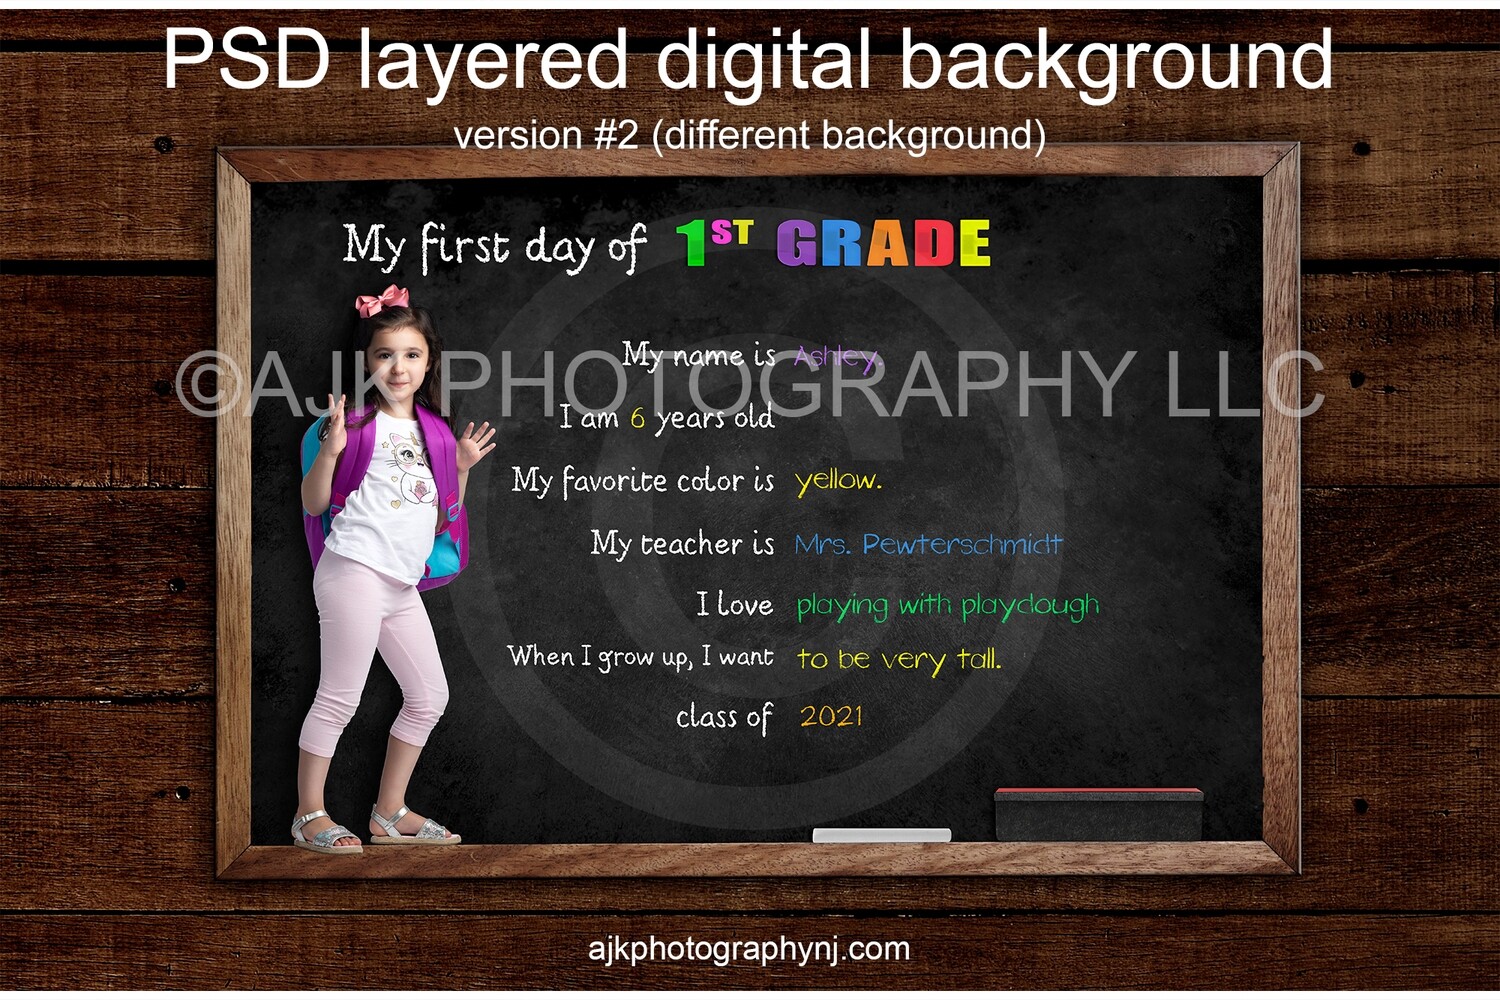 First day of First Grade Digital Backdrop, back to school, digital background, version #2